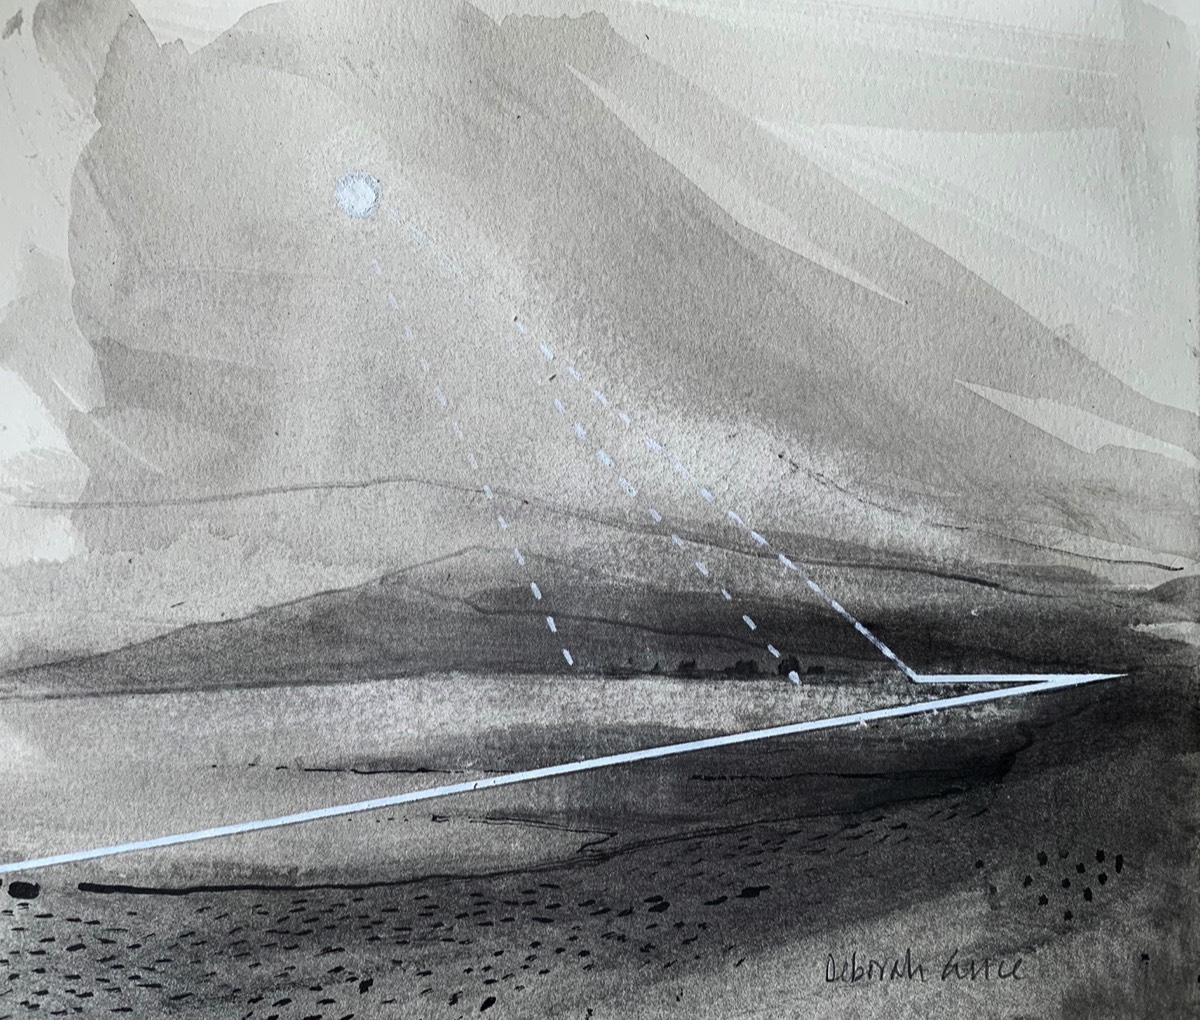 Deborah Grice ink drawing of a misty coastal landscape with abstract white lines